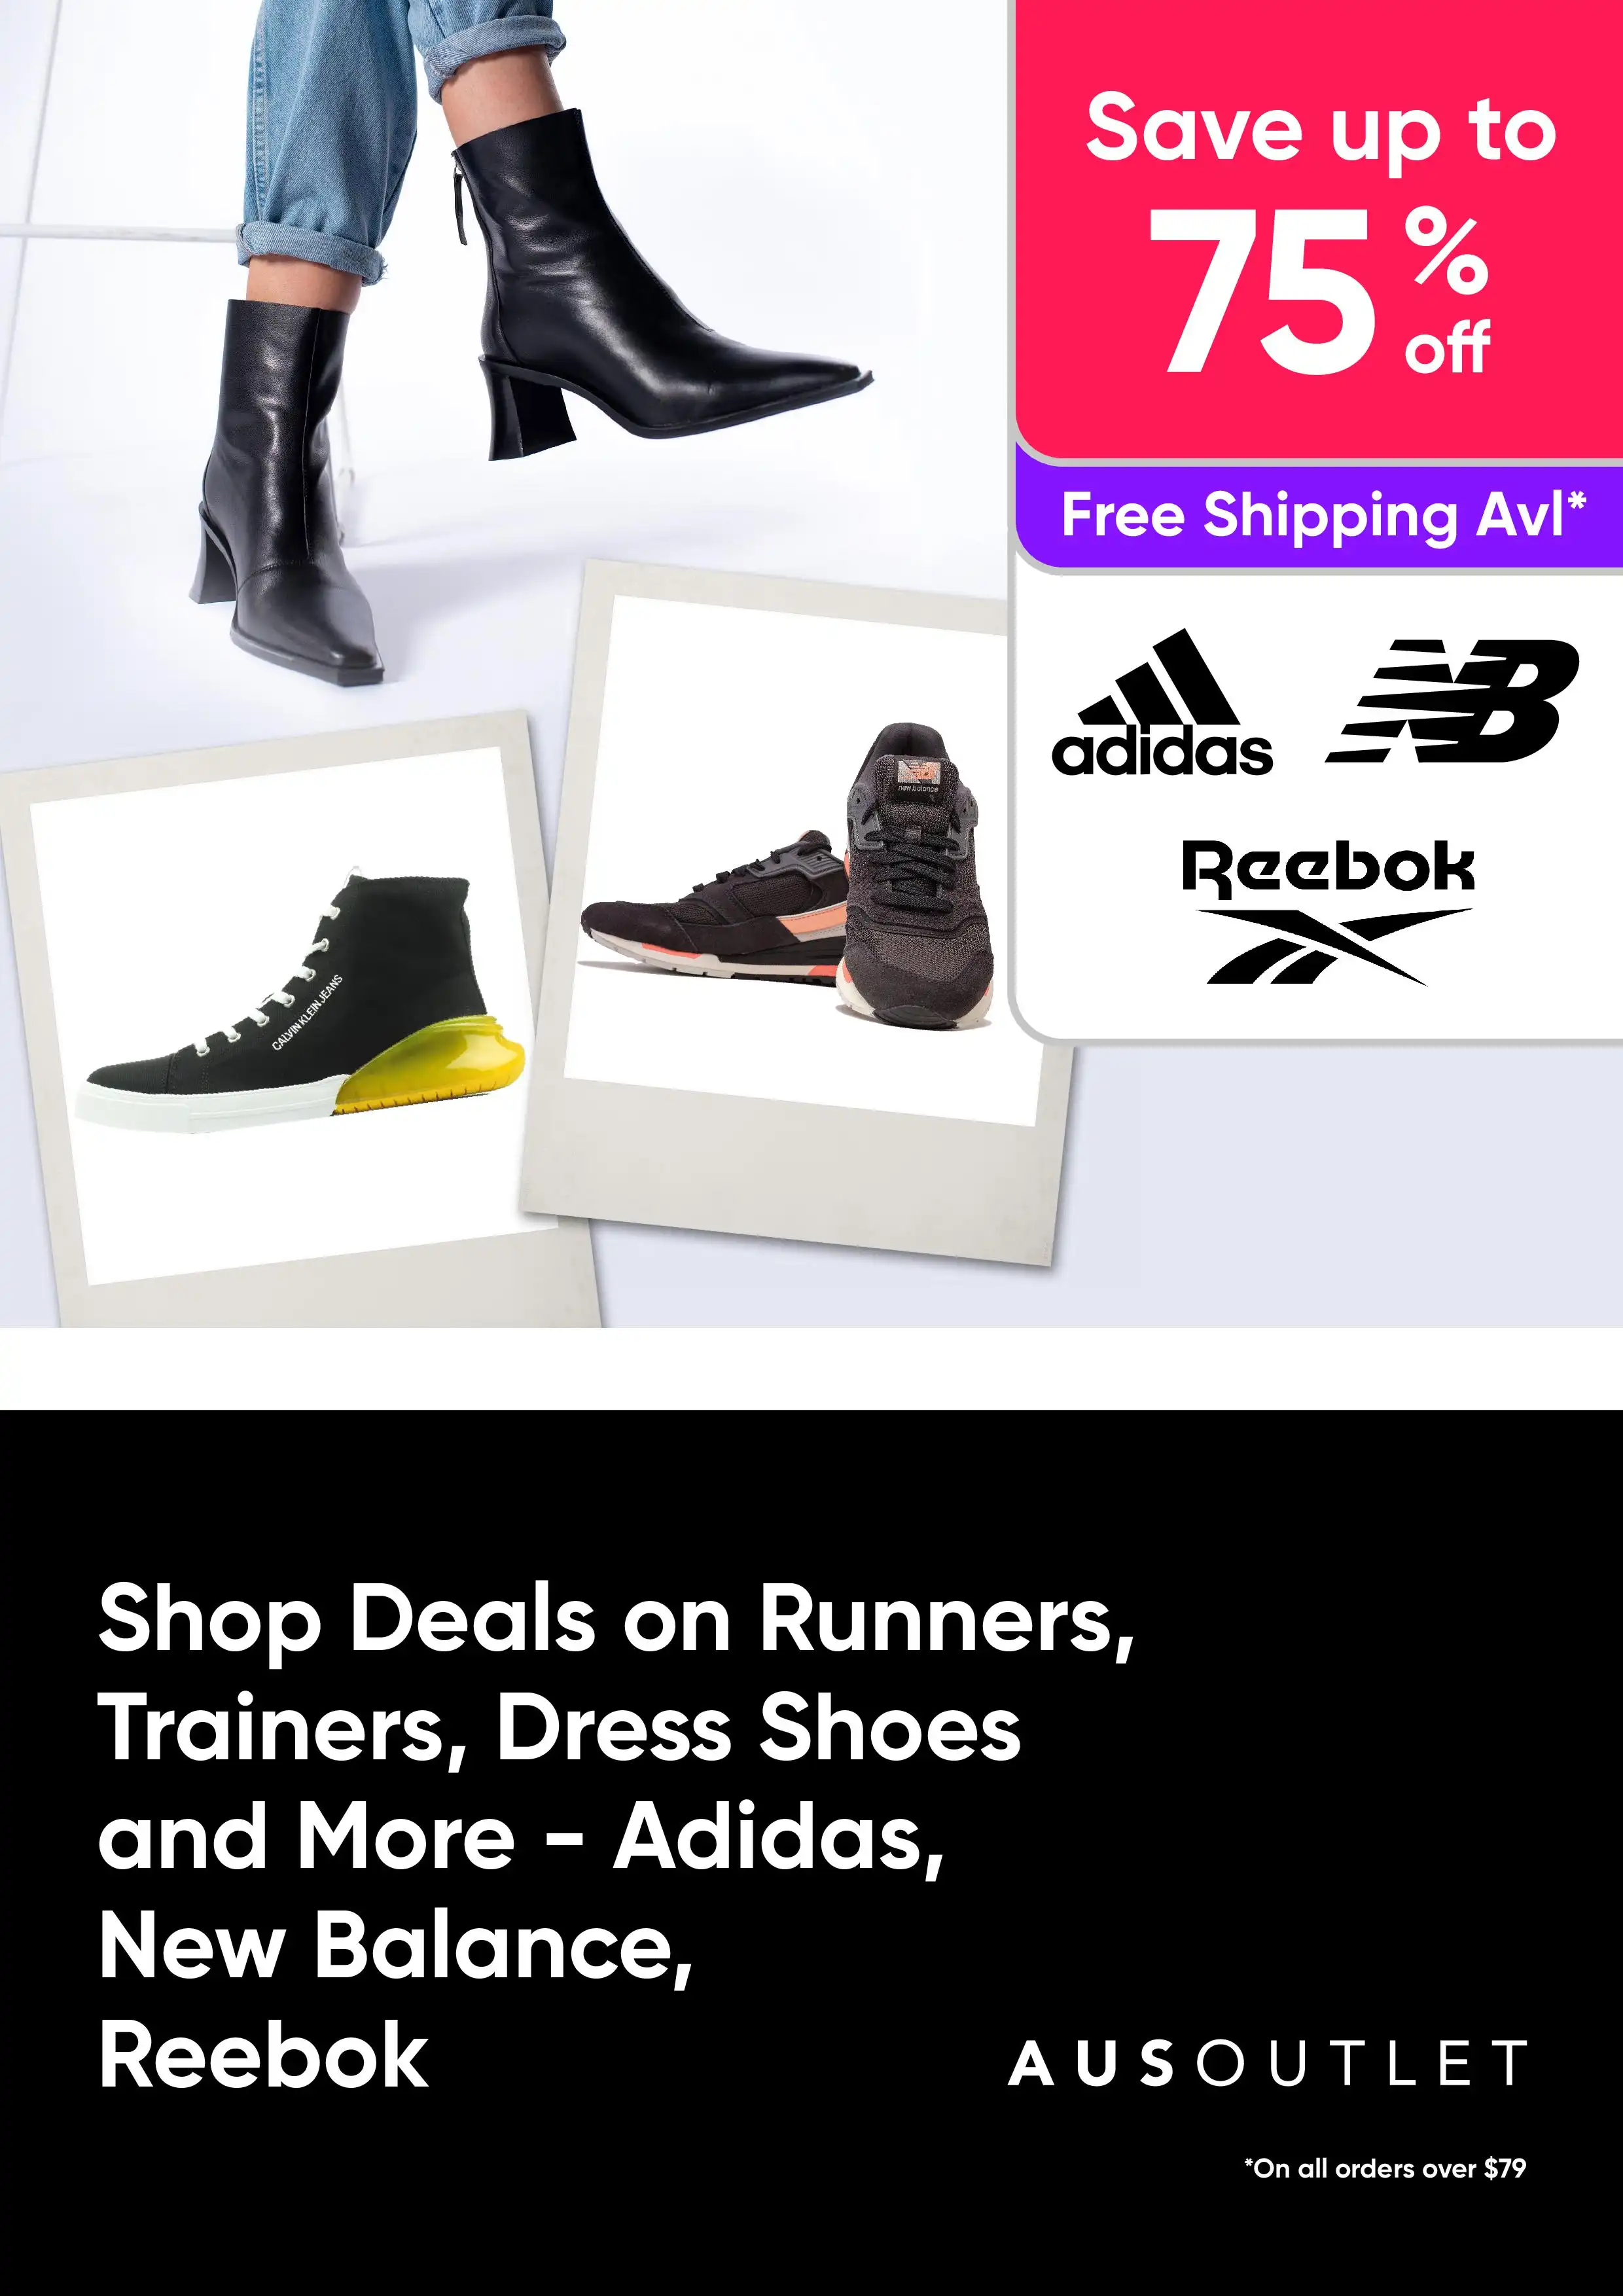 Shop Deals on Runners, Trainers, Dress Shoes and More - Save Up to 75% Off